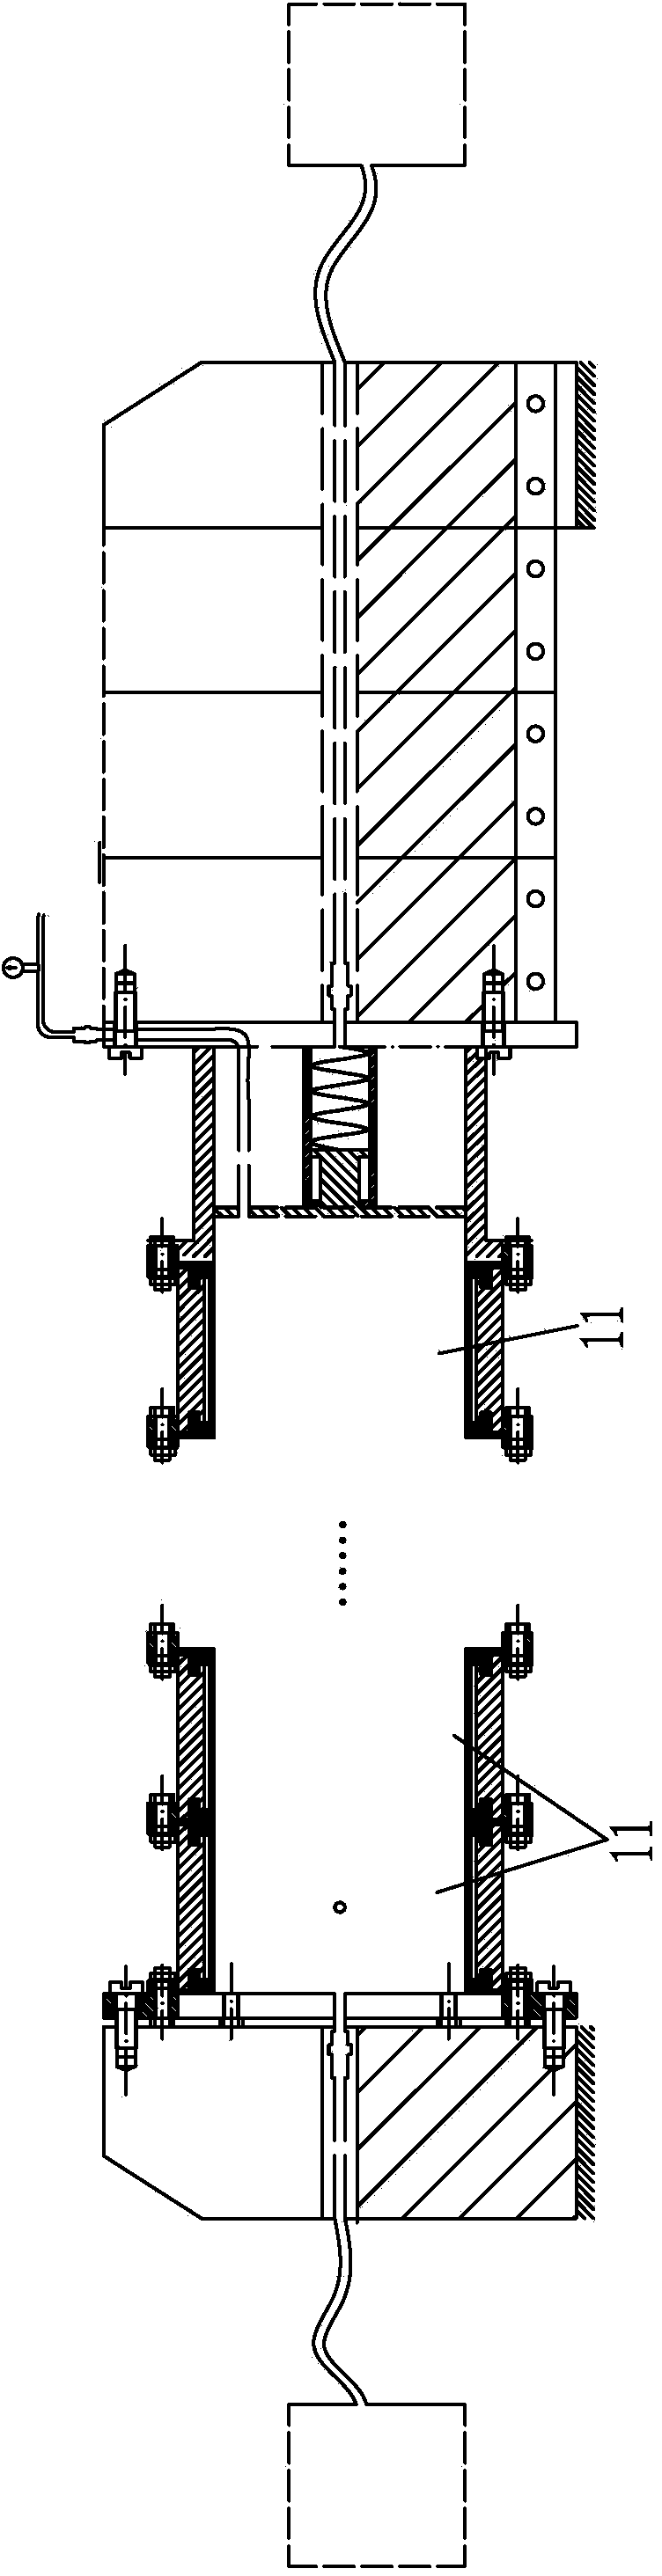 Pressurized grouting test device and method for rock specimens